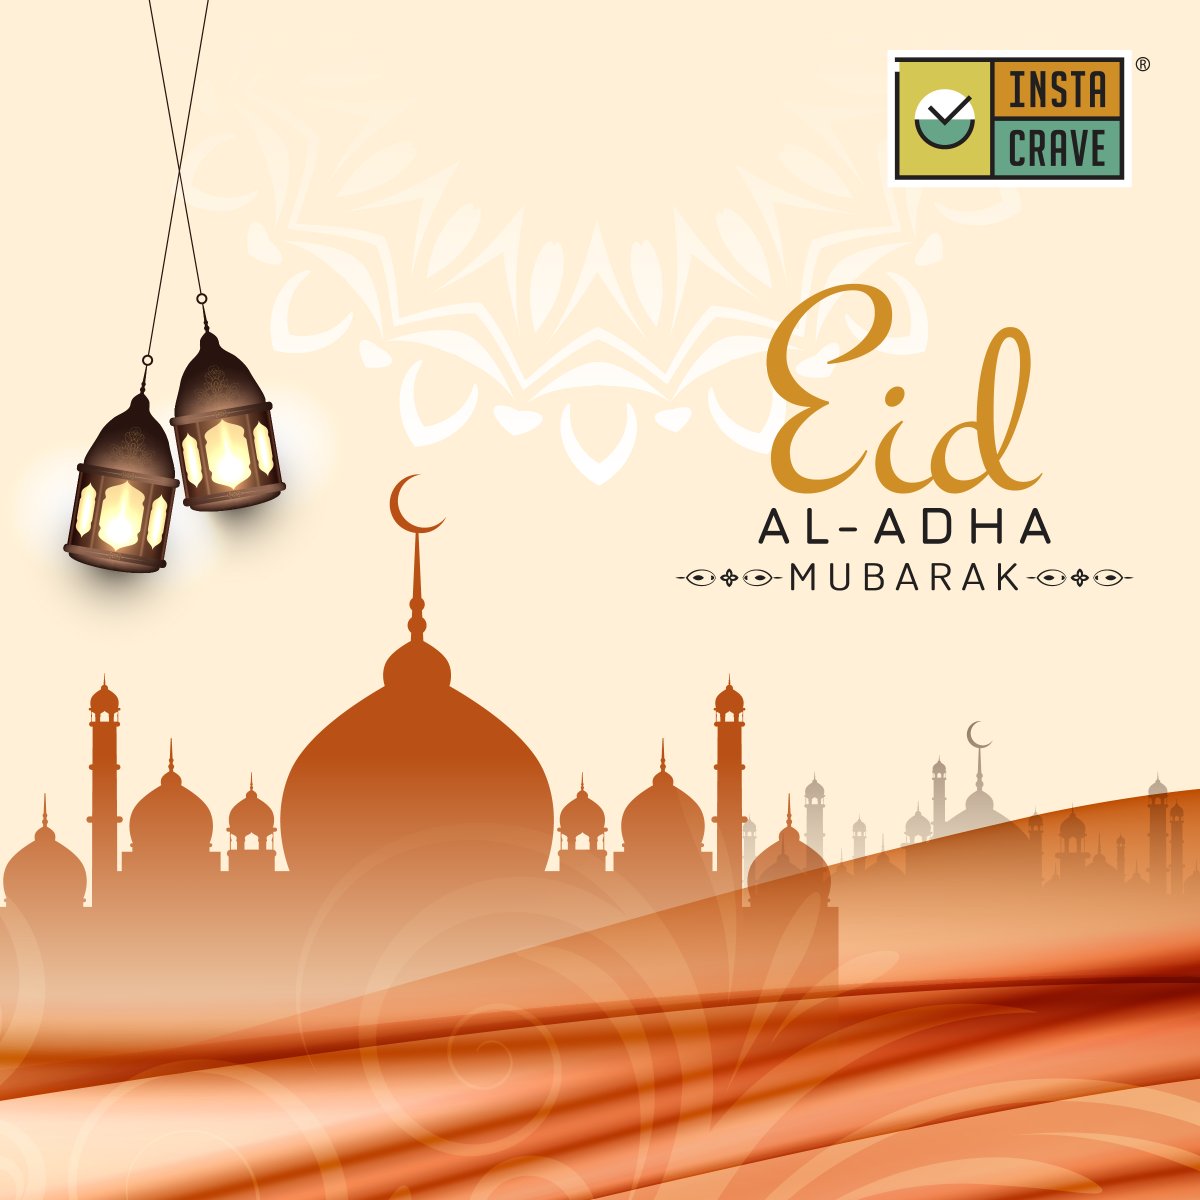 On this occasion of Eid, We wish you happiness, peace, and prosperity..#eidMubarak . . . #Instacrave #instacrave #eidaladha #eid #eid2020 #bakrid2020 #eidaladhamubarak #eidaladha2020 #eidaladhamubarak2020 #eidmubarak2020 #eidmubarak #eidspecial